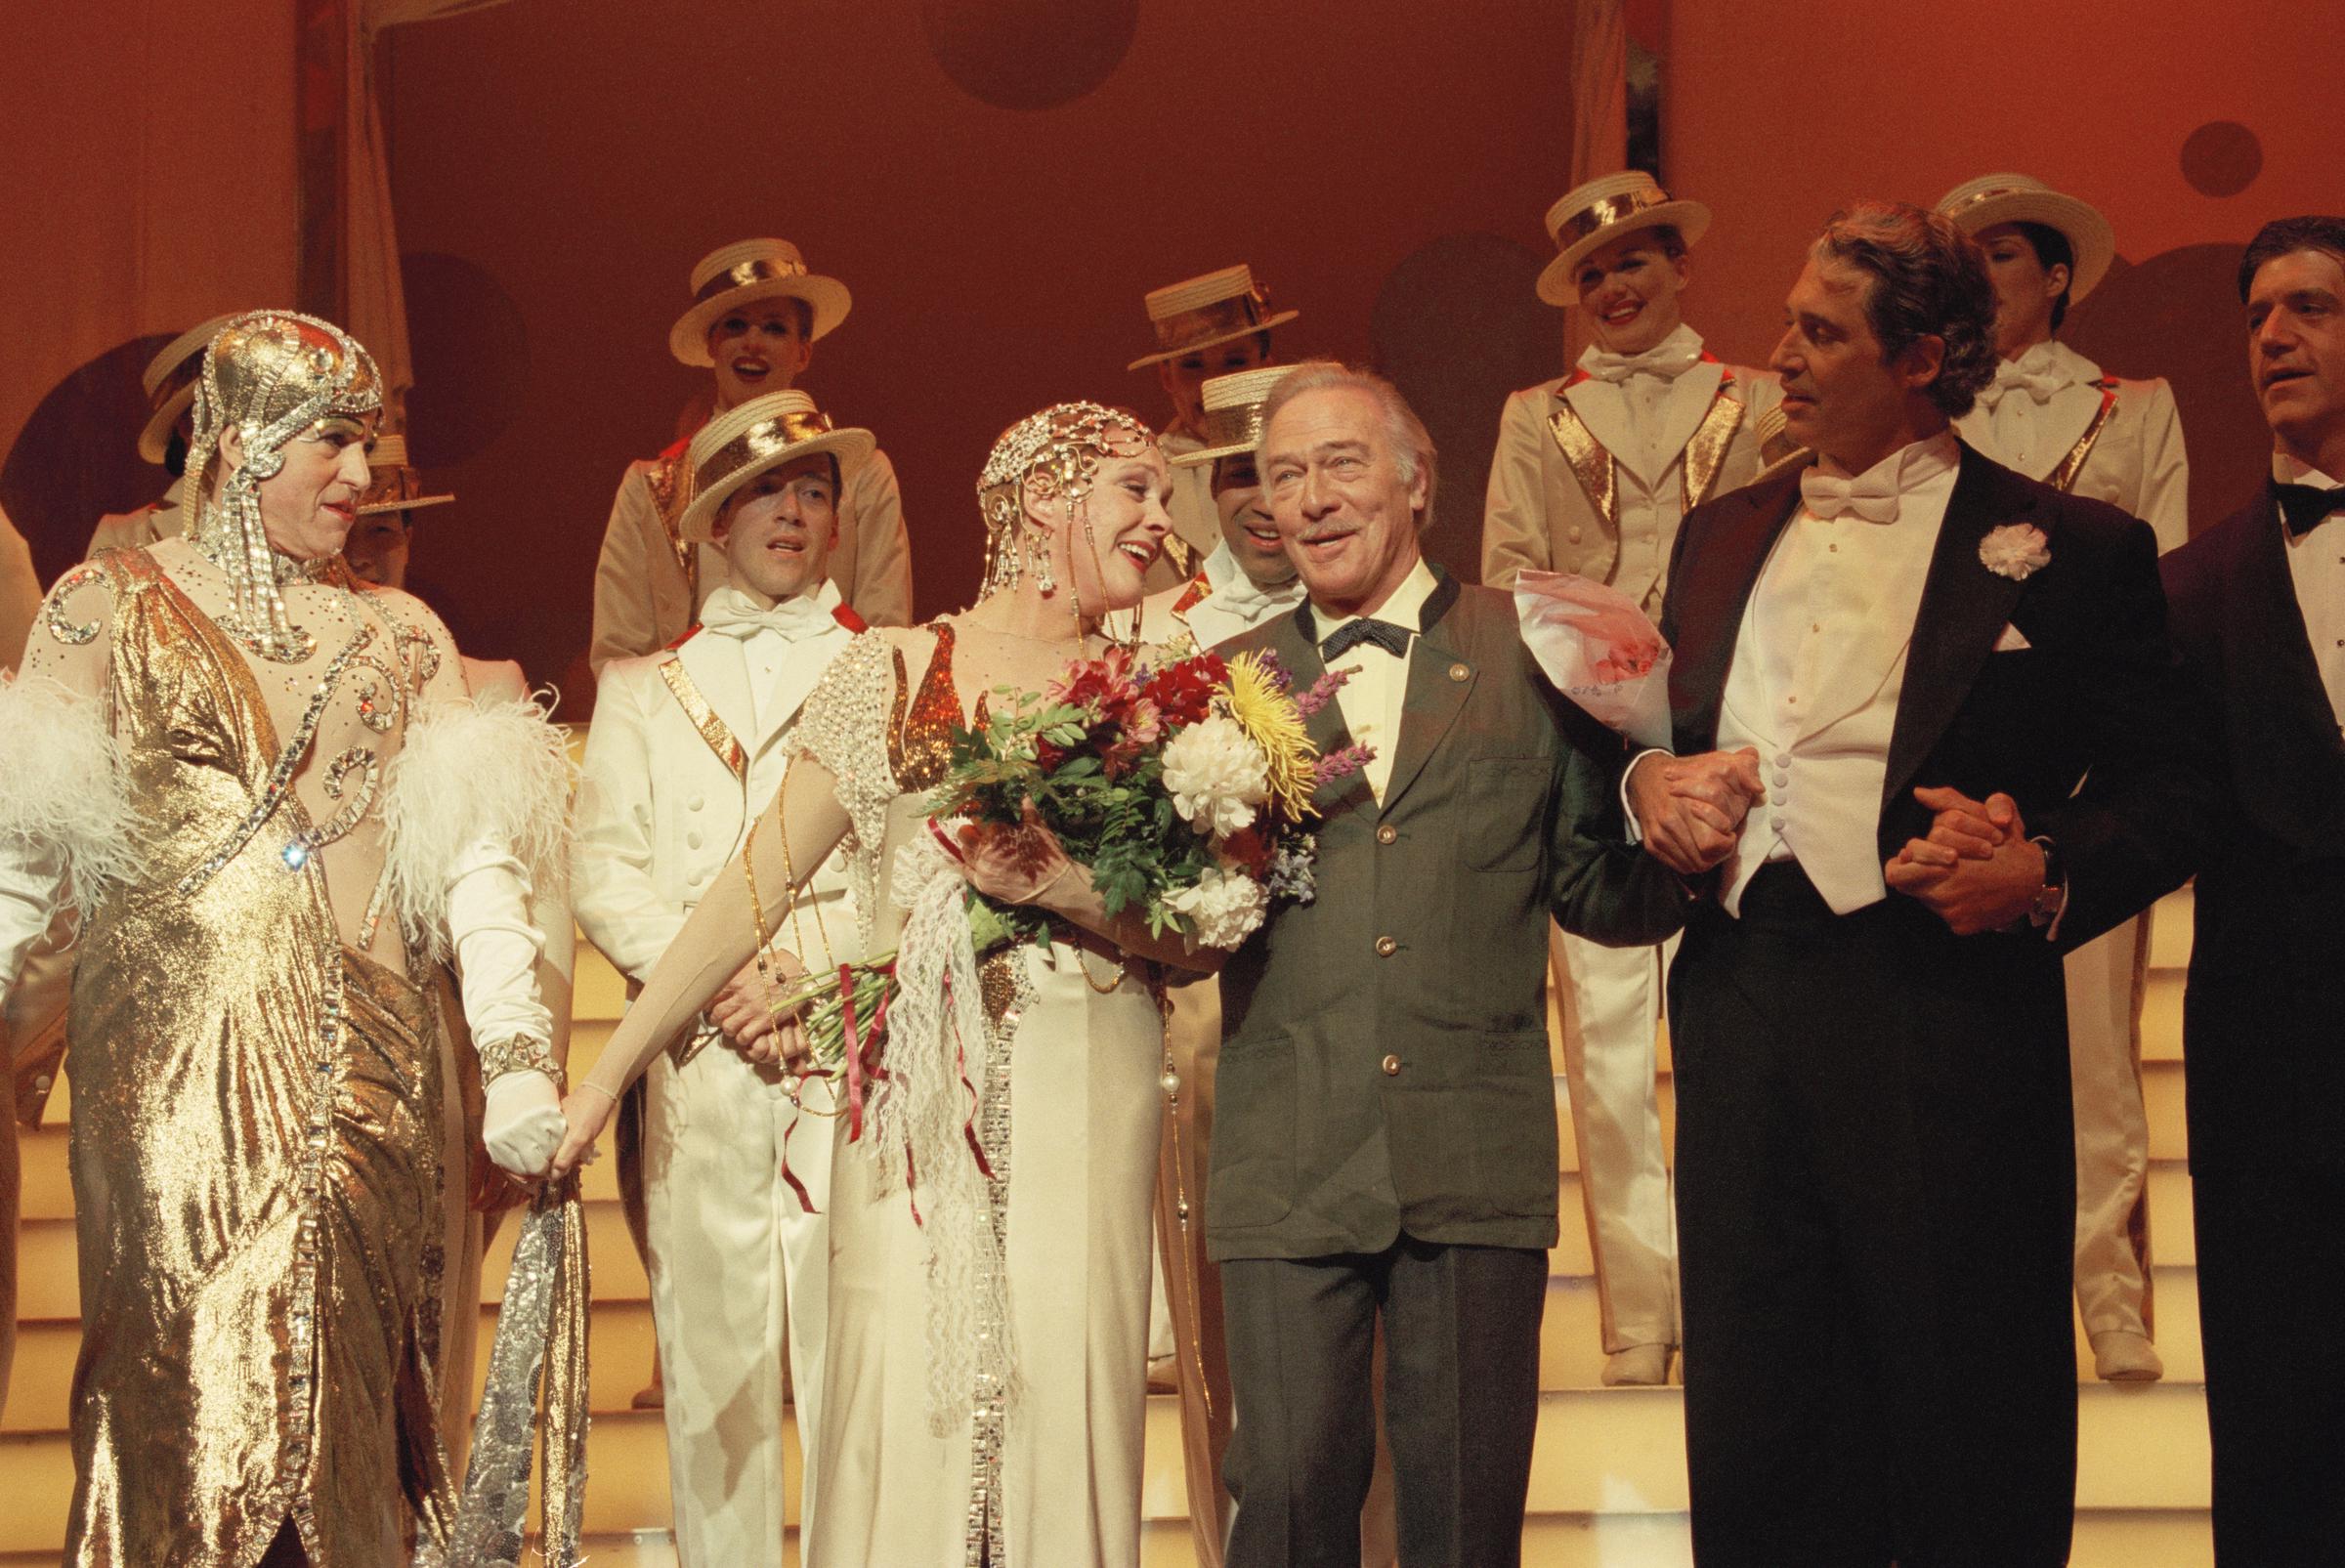 Julie Andrews and her castmates onstage during the actress's final performance in the Broadway musical "Victor/Victoria" on June, 8, 1997, in New York City. | Source: Getty Images